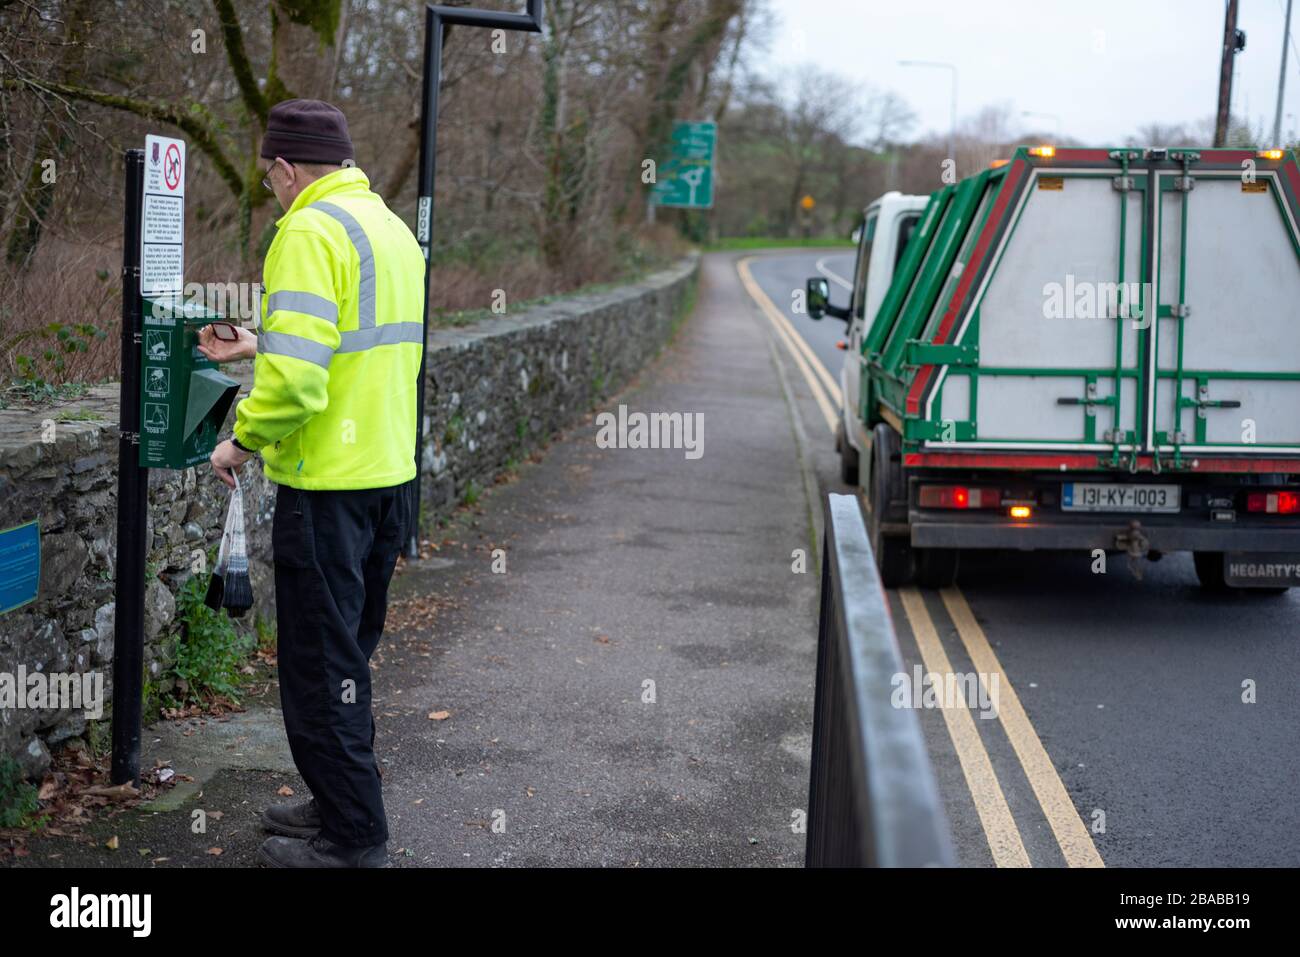 Council worker busy at work maintaining Mutt Mitt station for degradable dog waste bags. Mutt Mitt dispenser in Killarney, County Kerry, Ireland Stock Photo